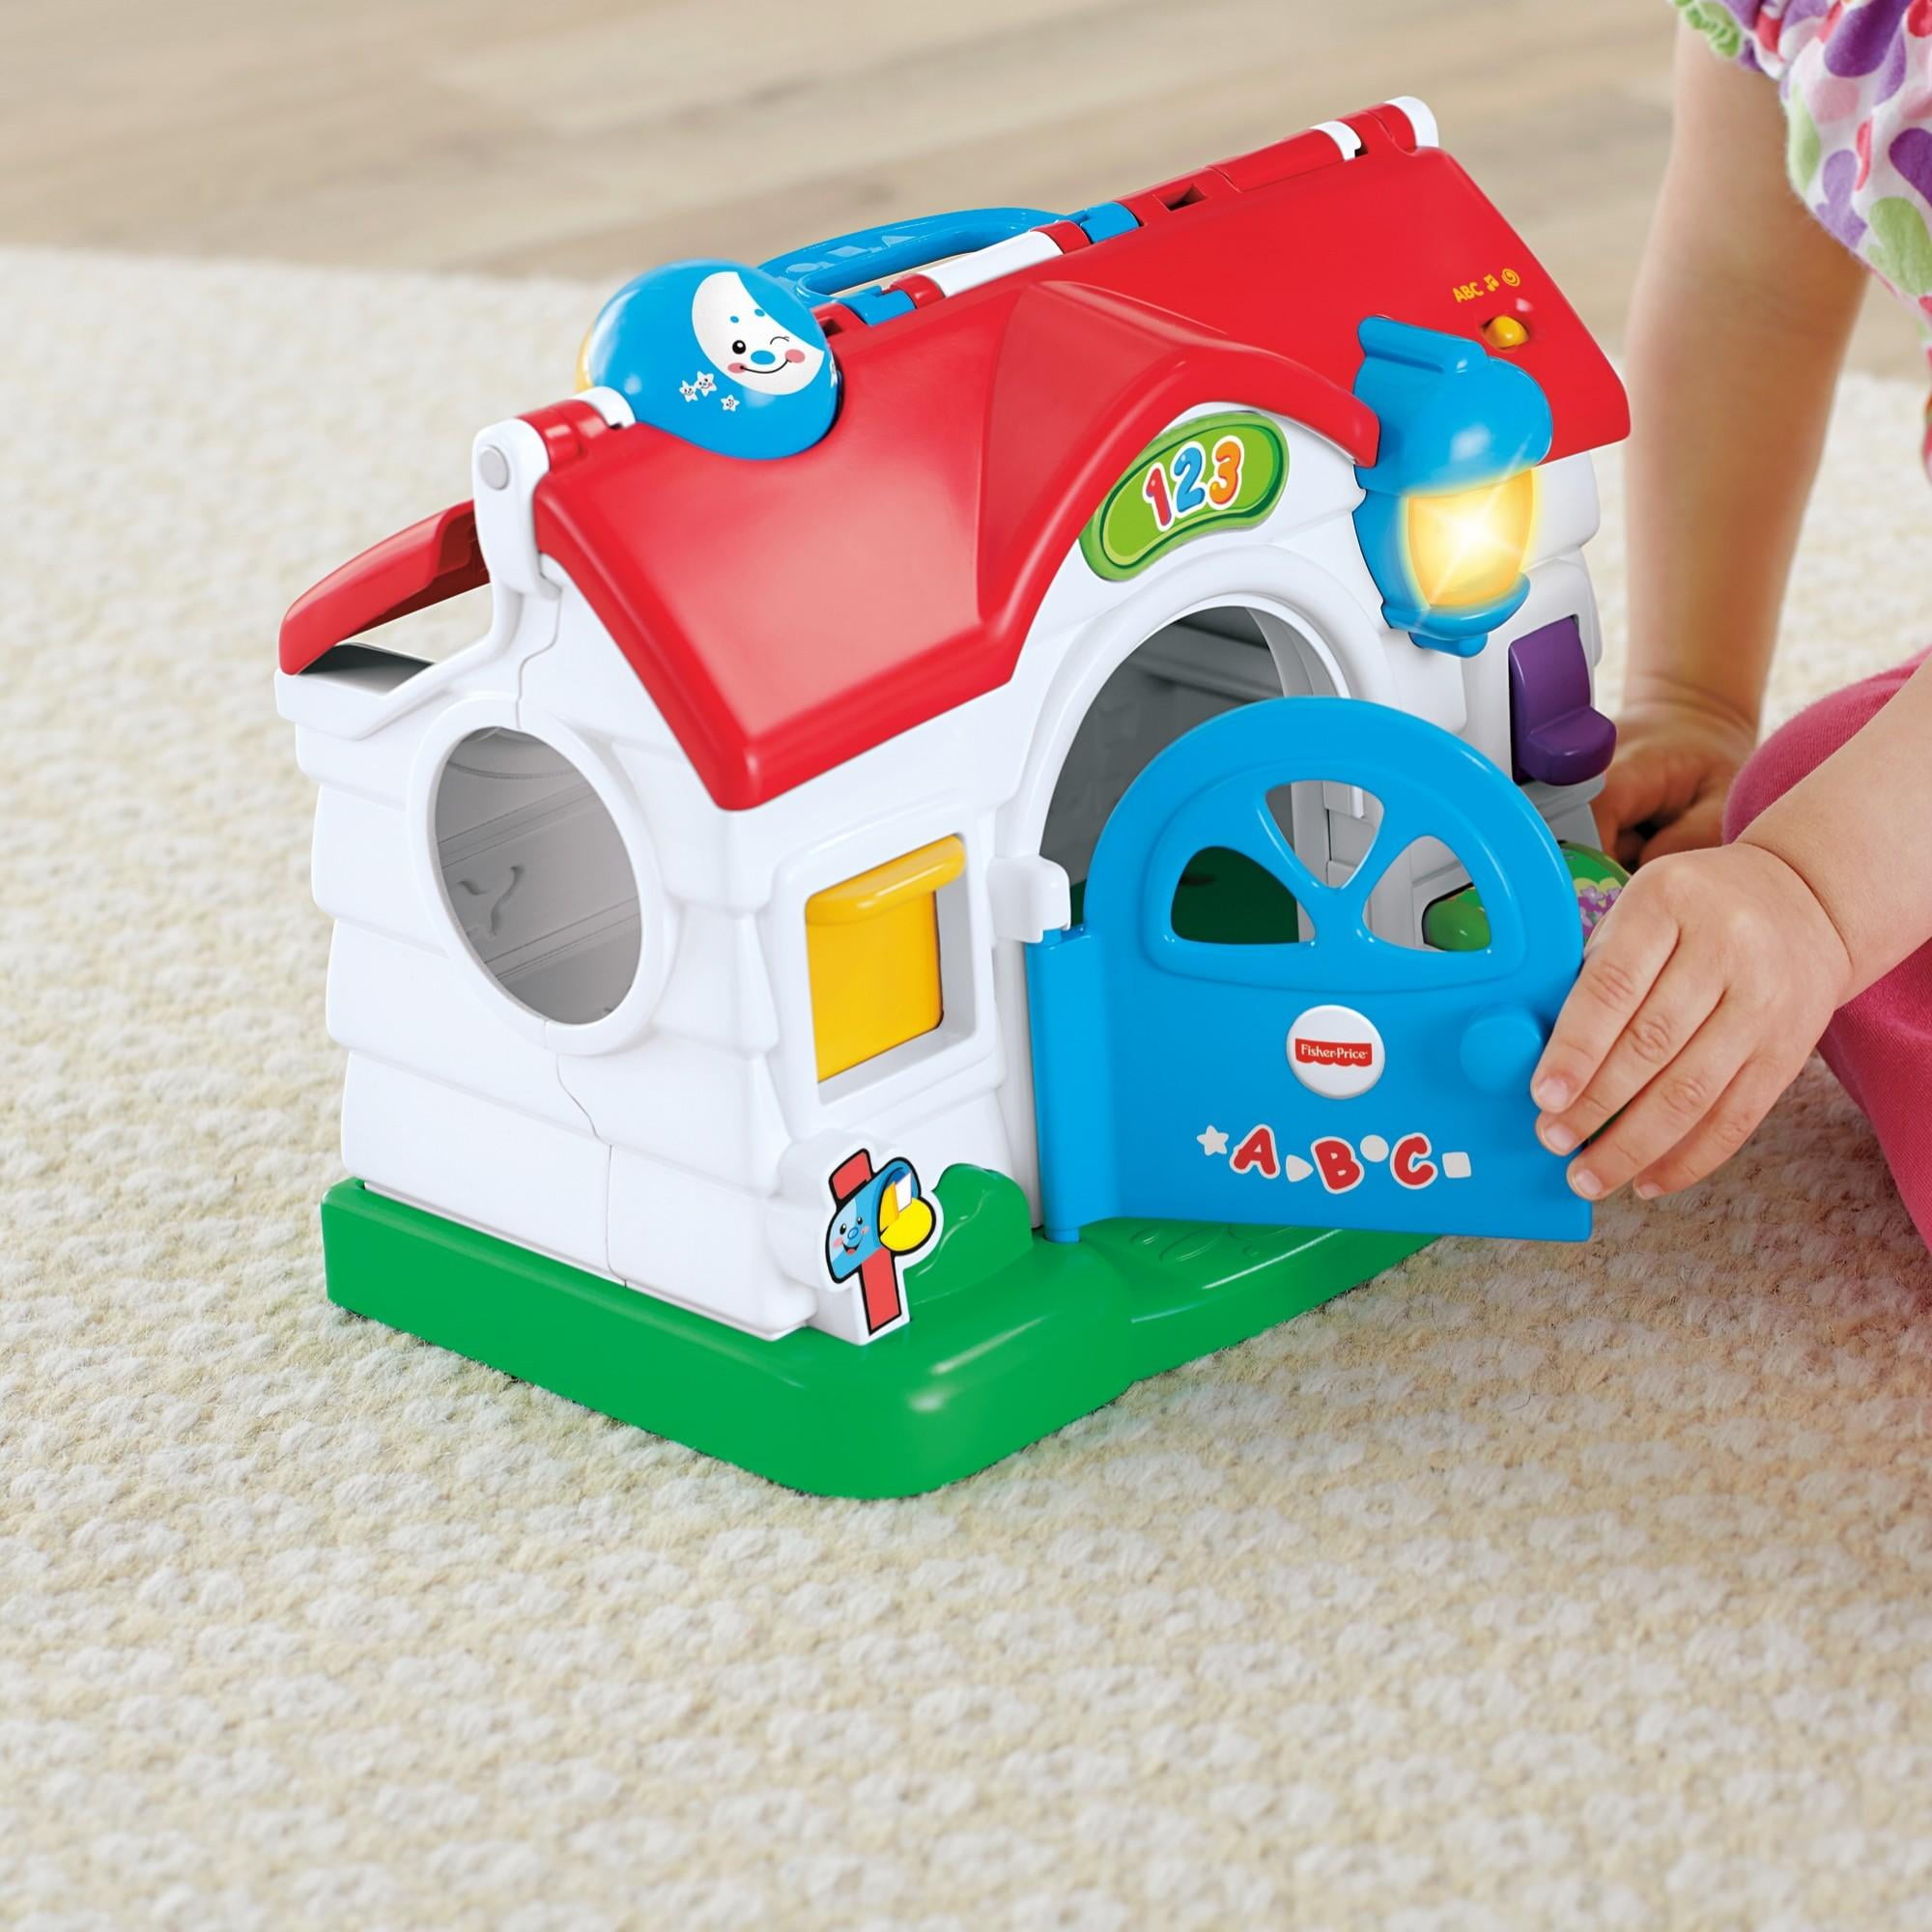 fisher price laugh and learn puppy's busy activity home